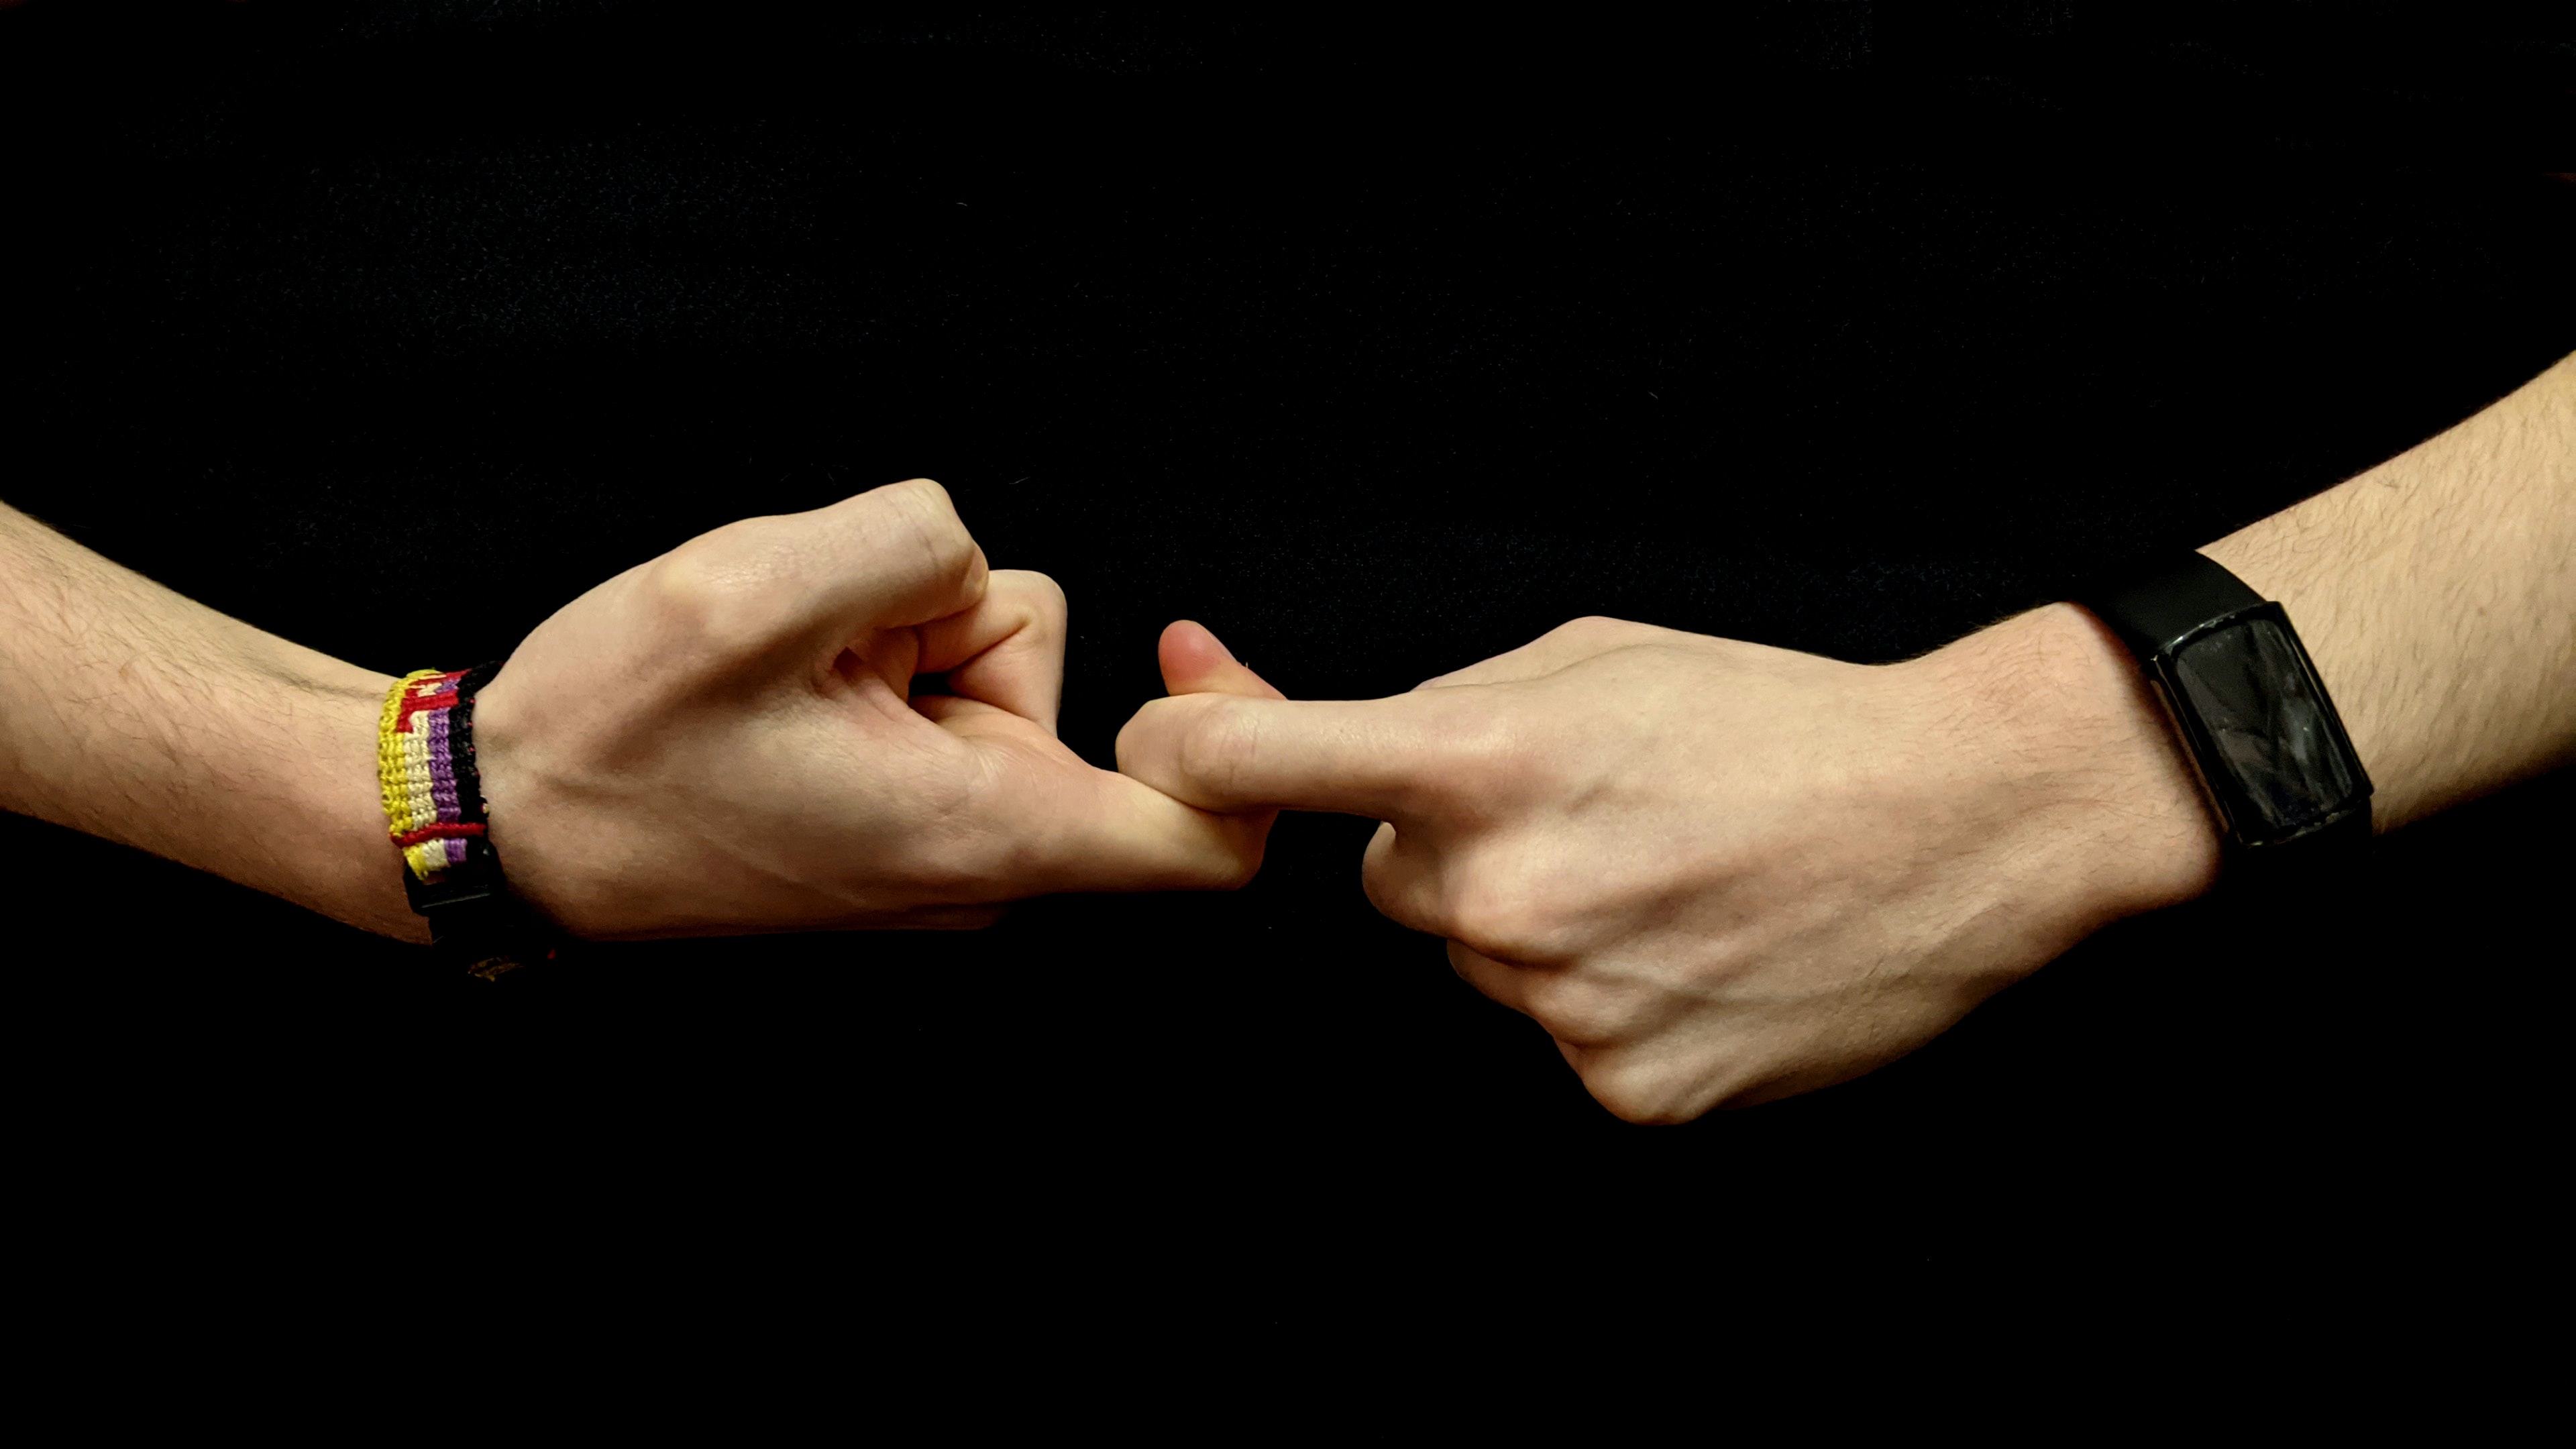 The hands of a young white person against a black background form the first half of the sign for “friendship” in American Sign Language. Image by Nic Rosenau, via Unsplash.com.